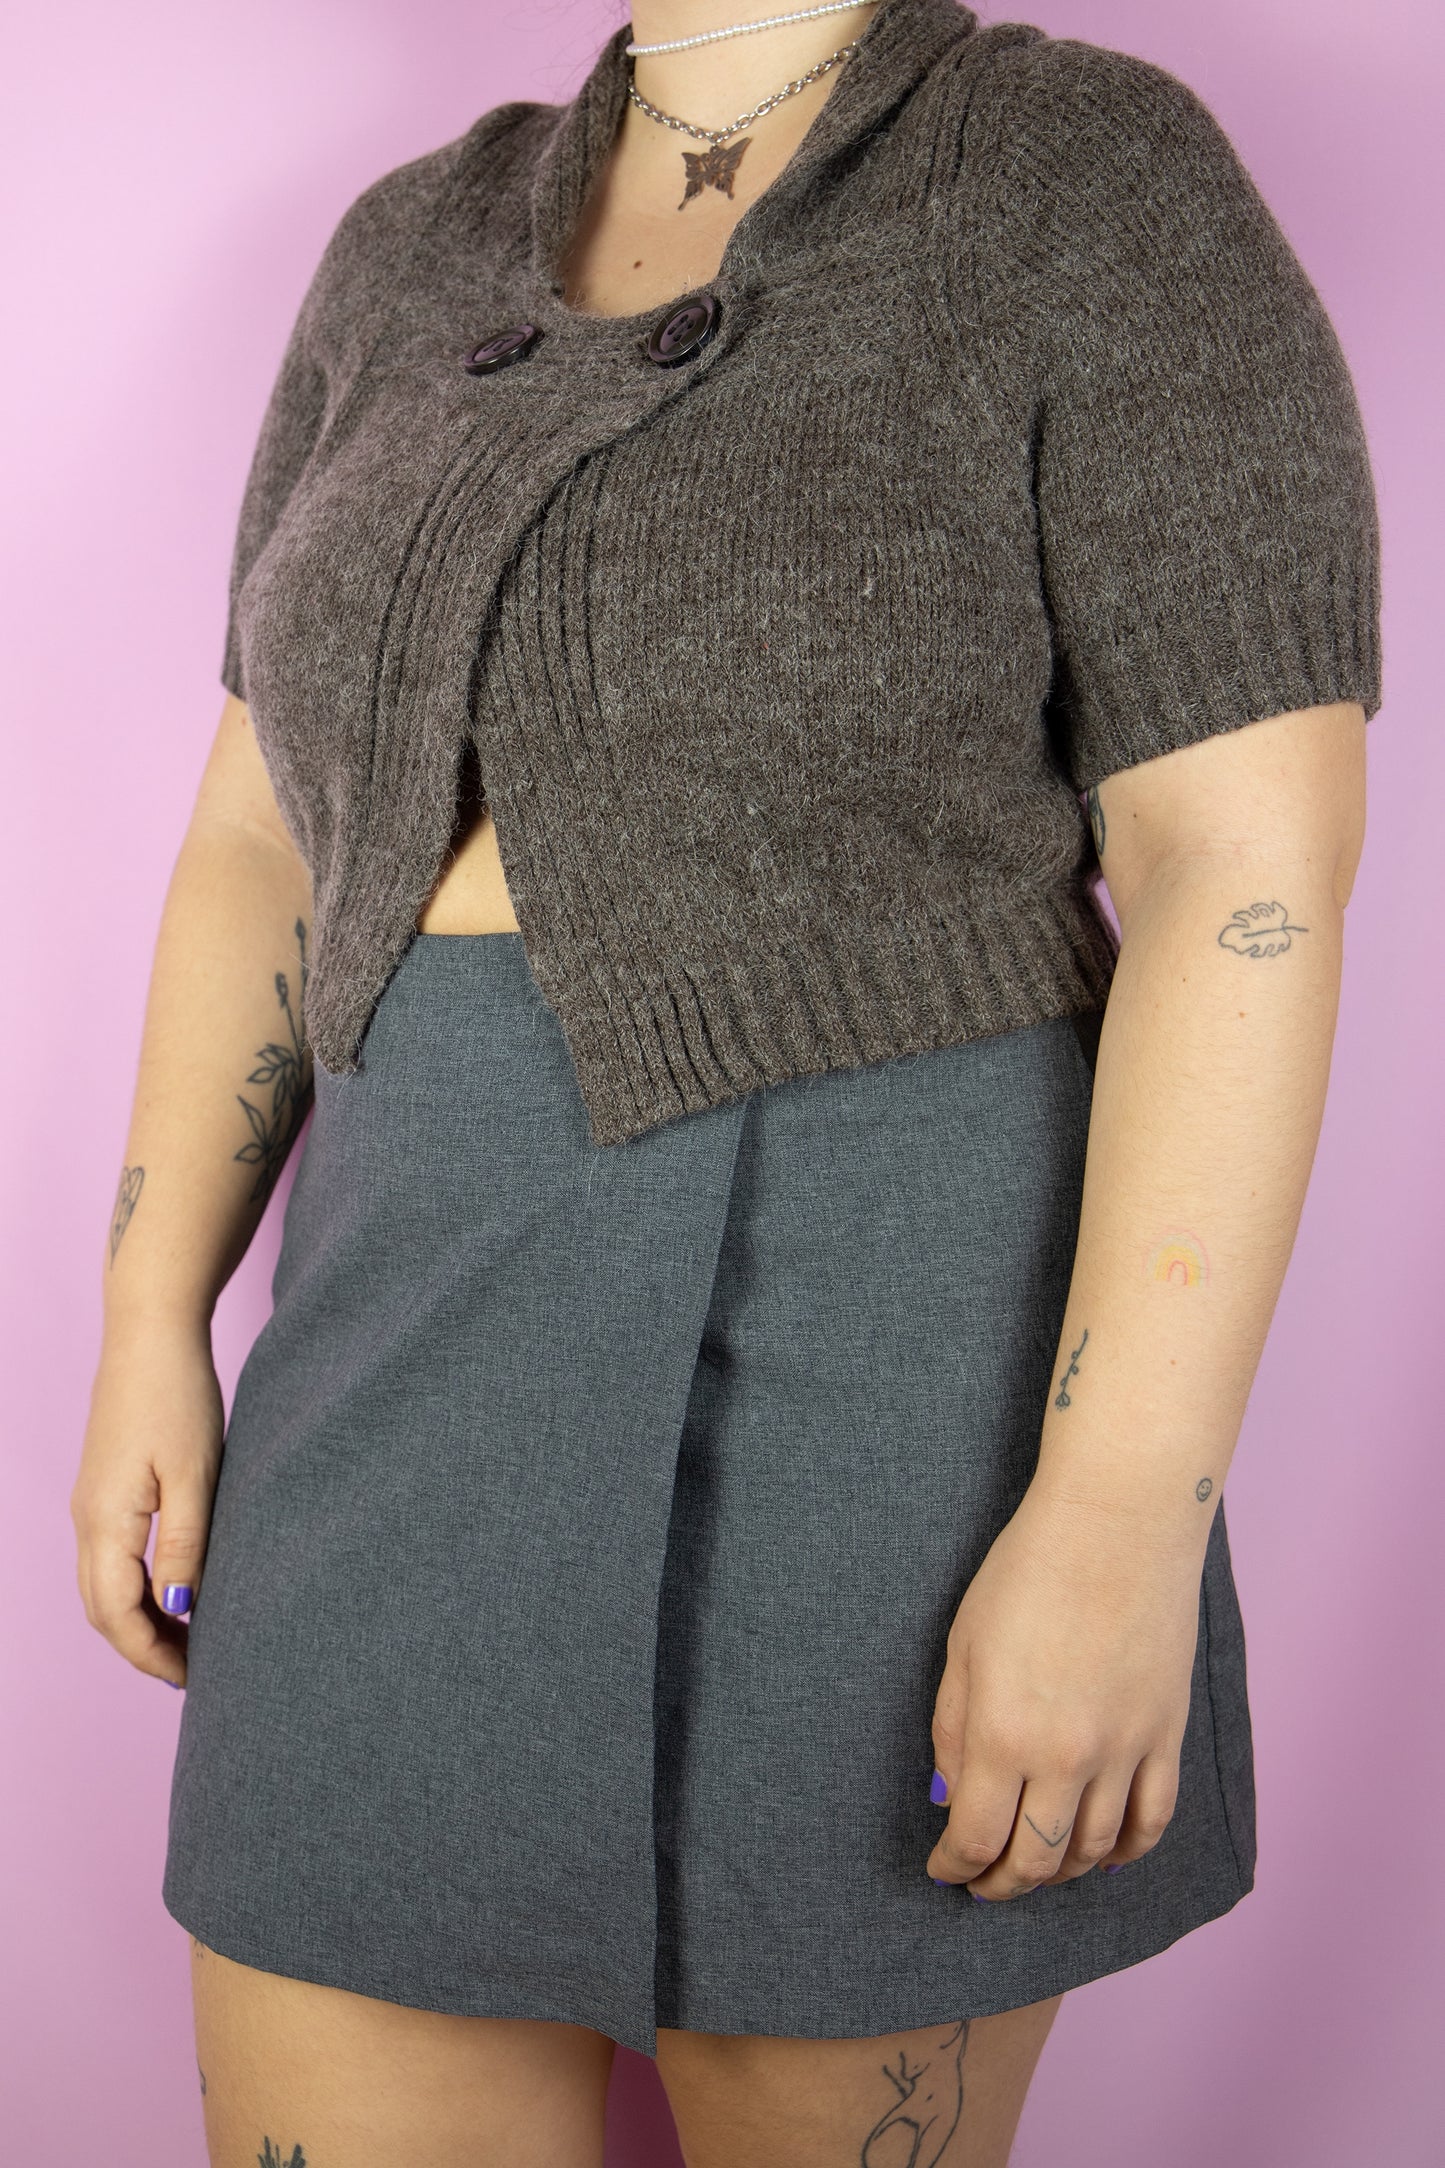 The Y2K Brown Knit Bolero Shrug is a vintage short-sleeved cropped cardigan with a two-button closure. Made from a blend of wool and mohair. Boho fairy grunge 2000s knitted bolero jacket.